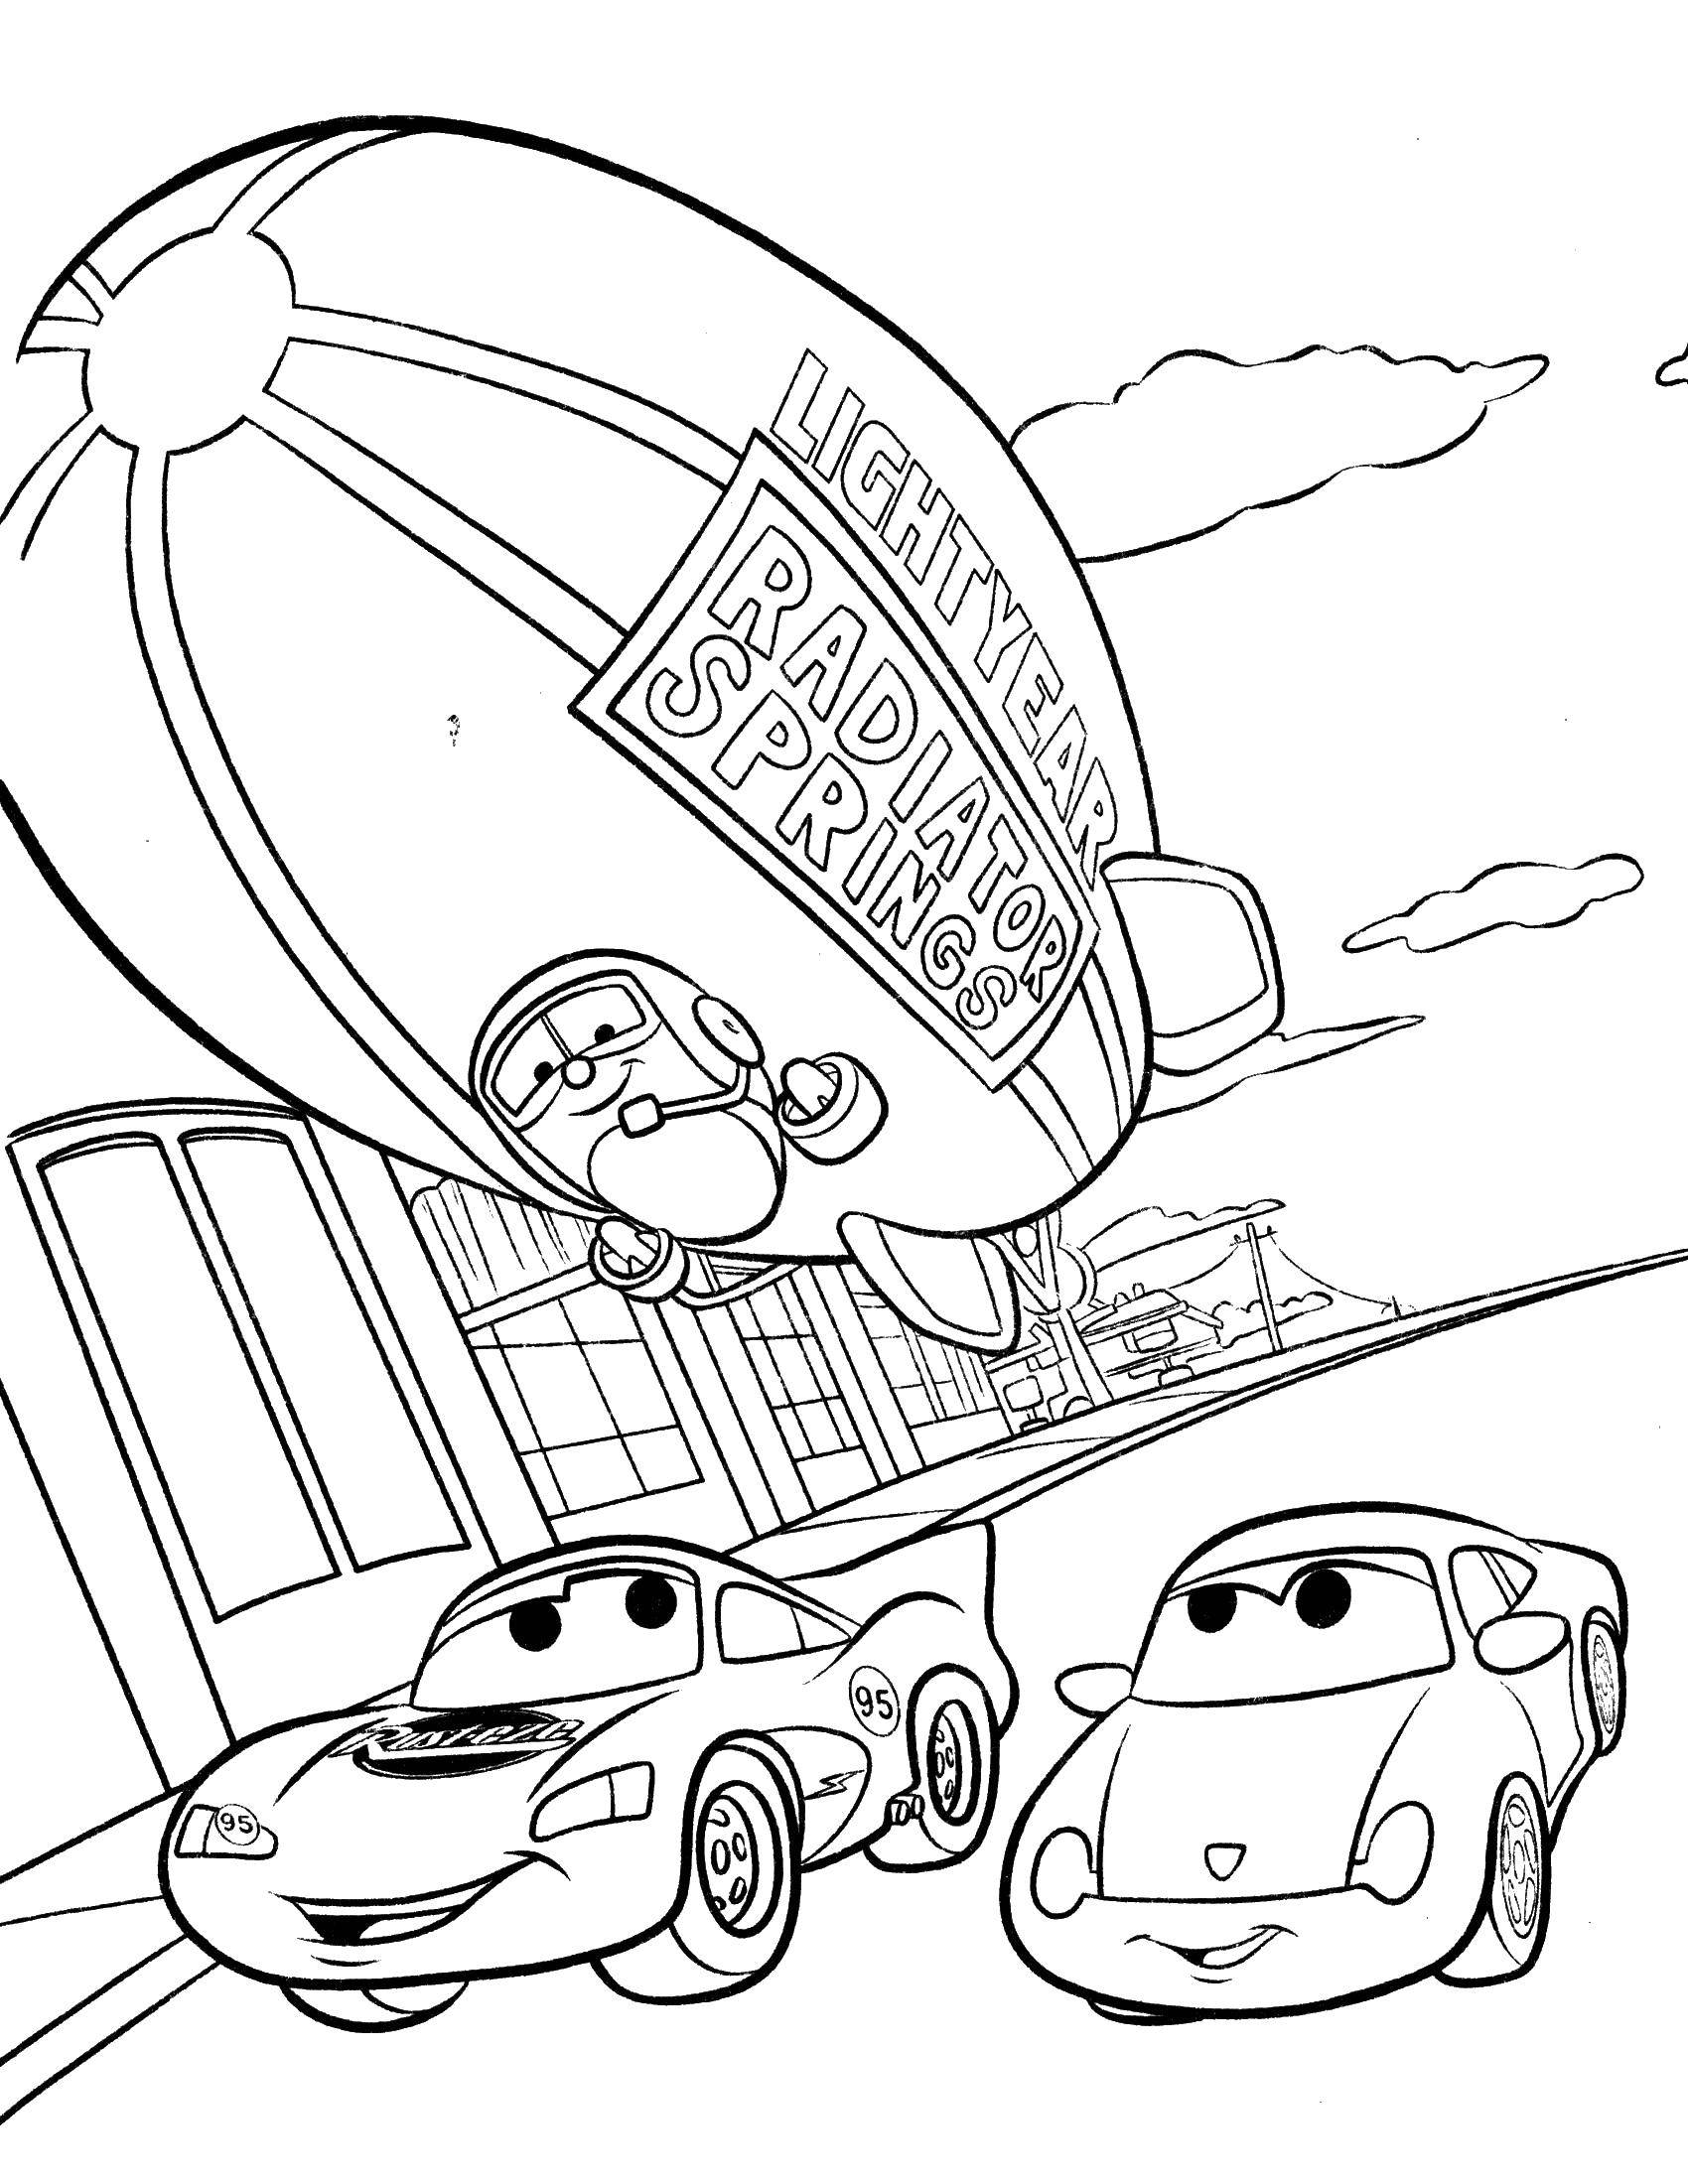 Coloring Cartoon. Category machine . Tags:  Transport, car.